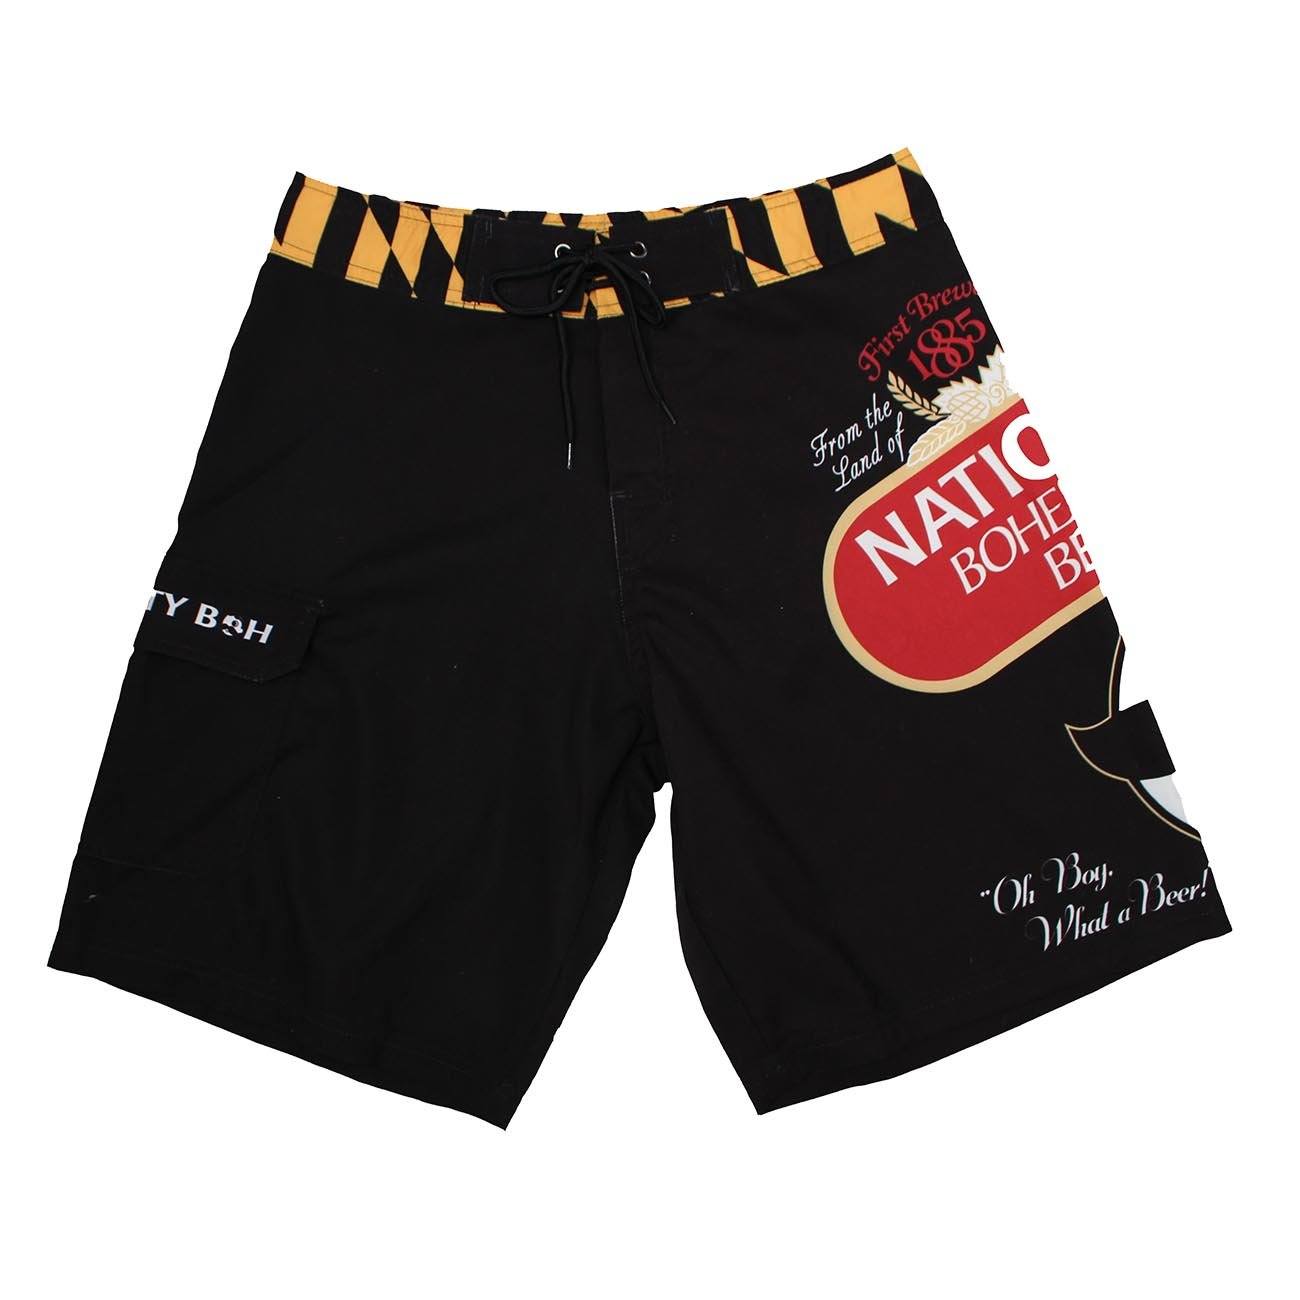 National Bohemian (Black) / Board Shorts - Route One Apparel